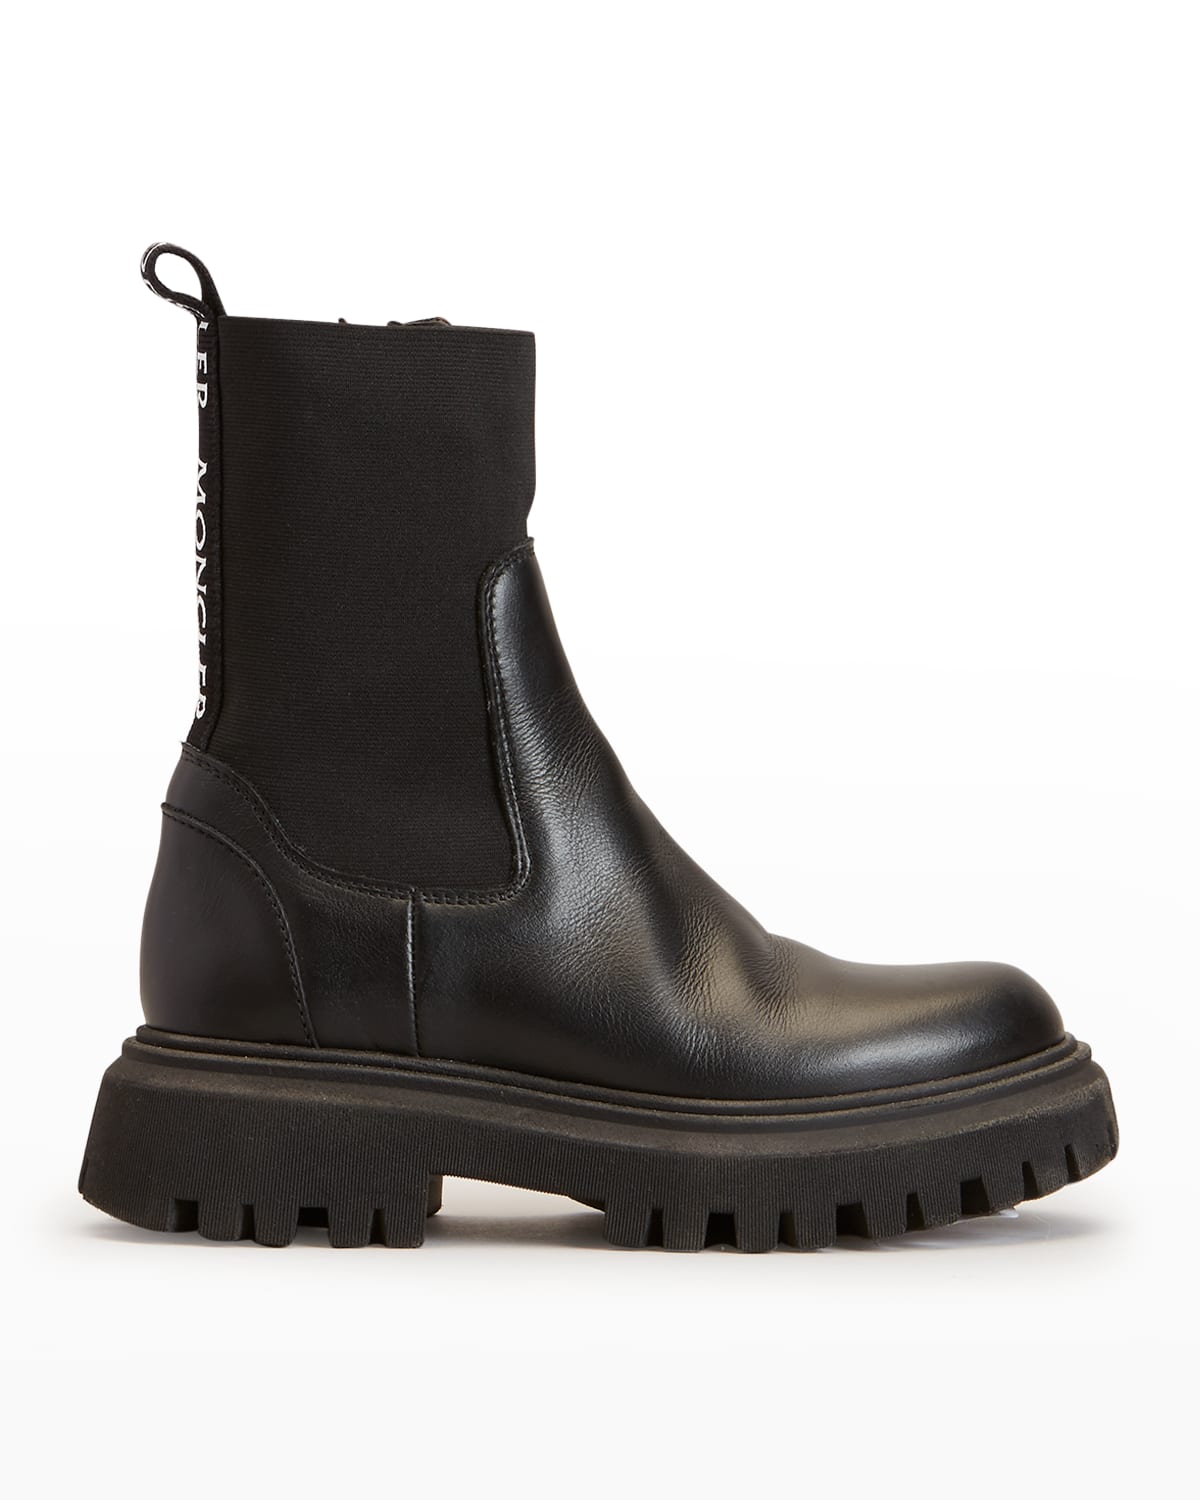 MONCLER GIRL'S PETIT NEUE CHELSEA ANKLE BOOTS, TODDLERS/KIDS